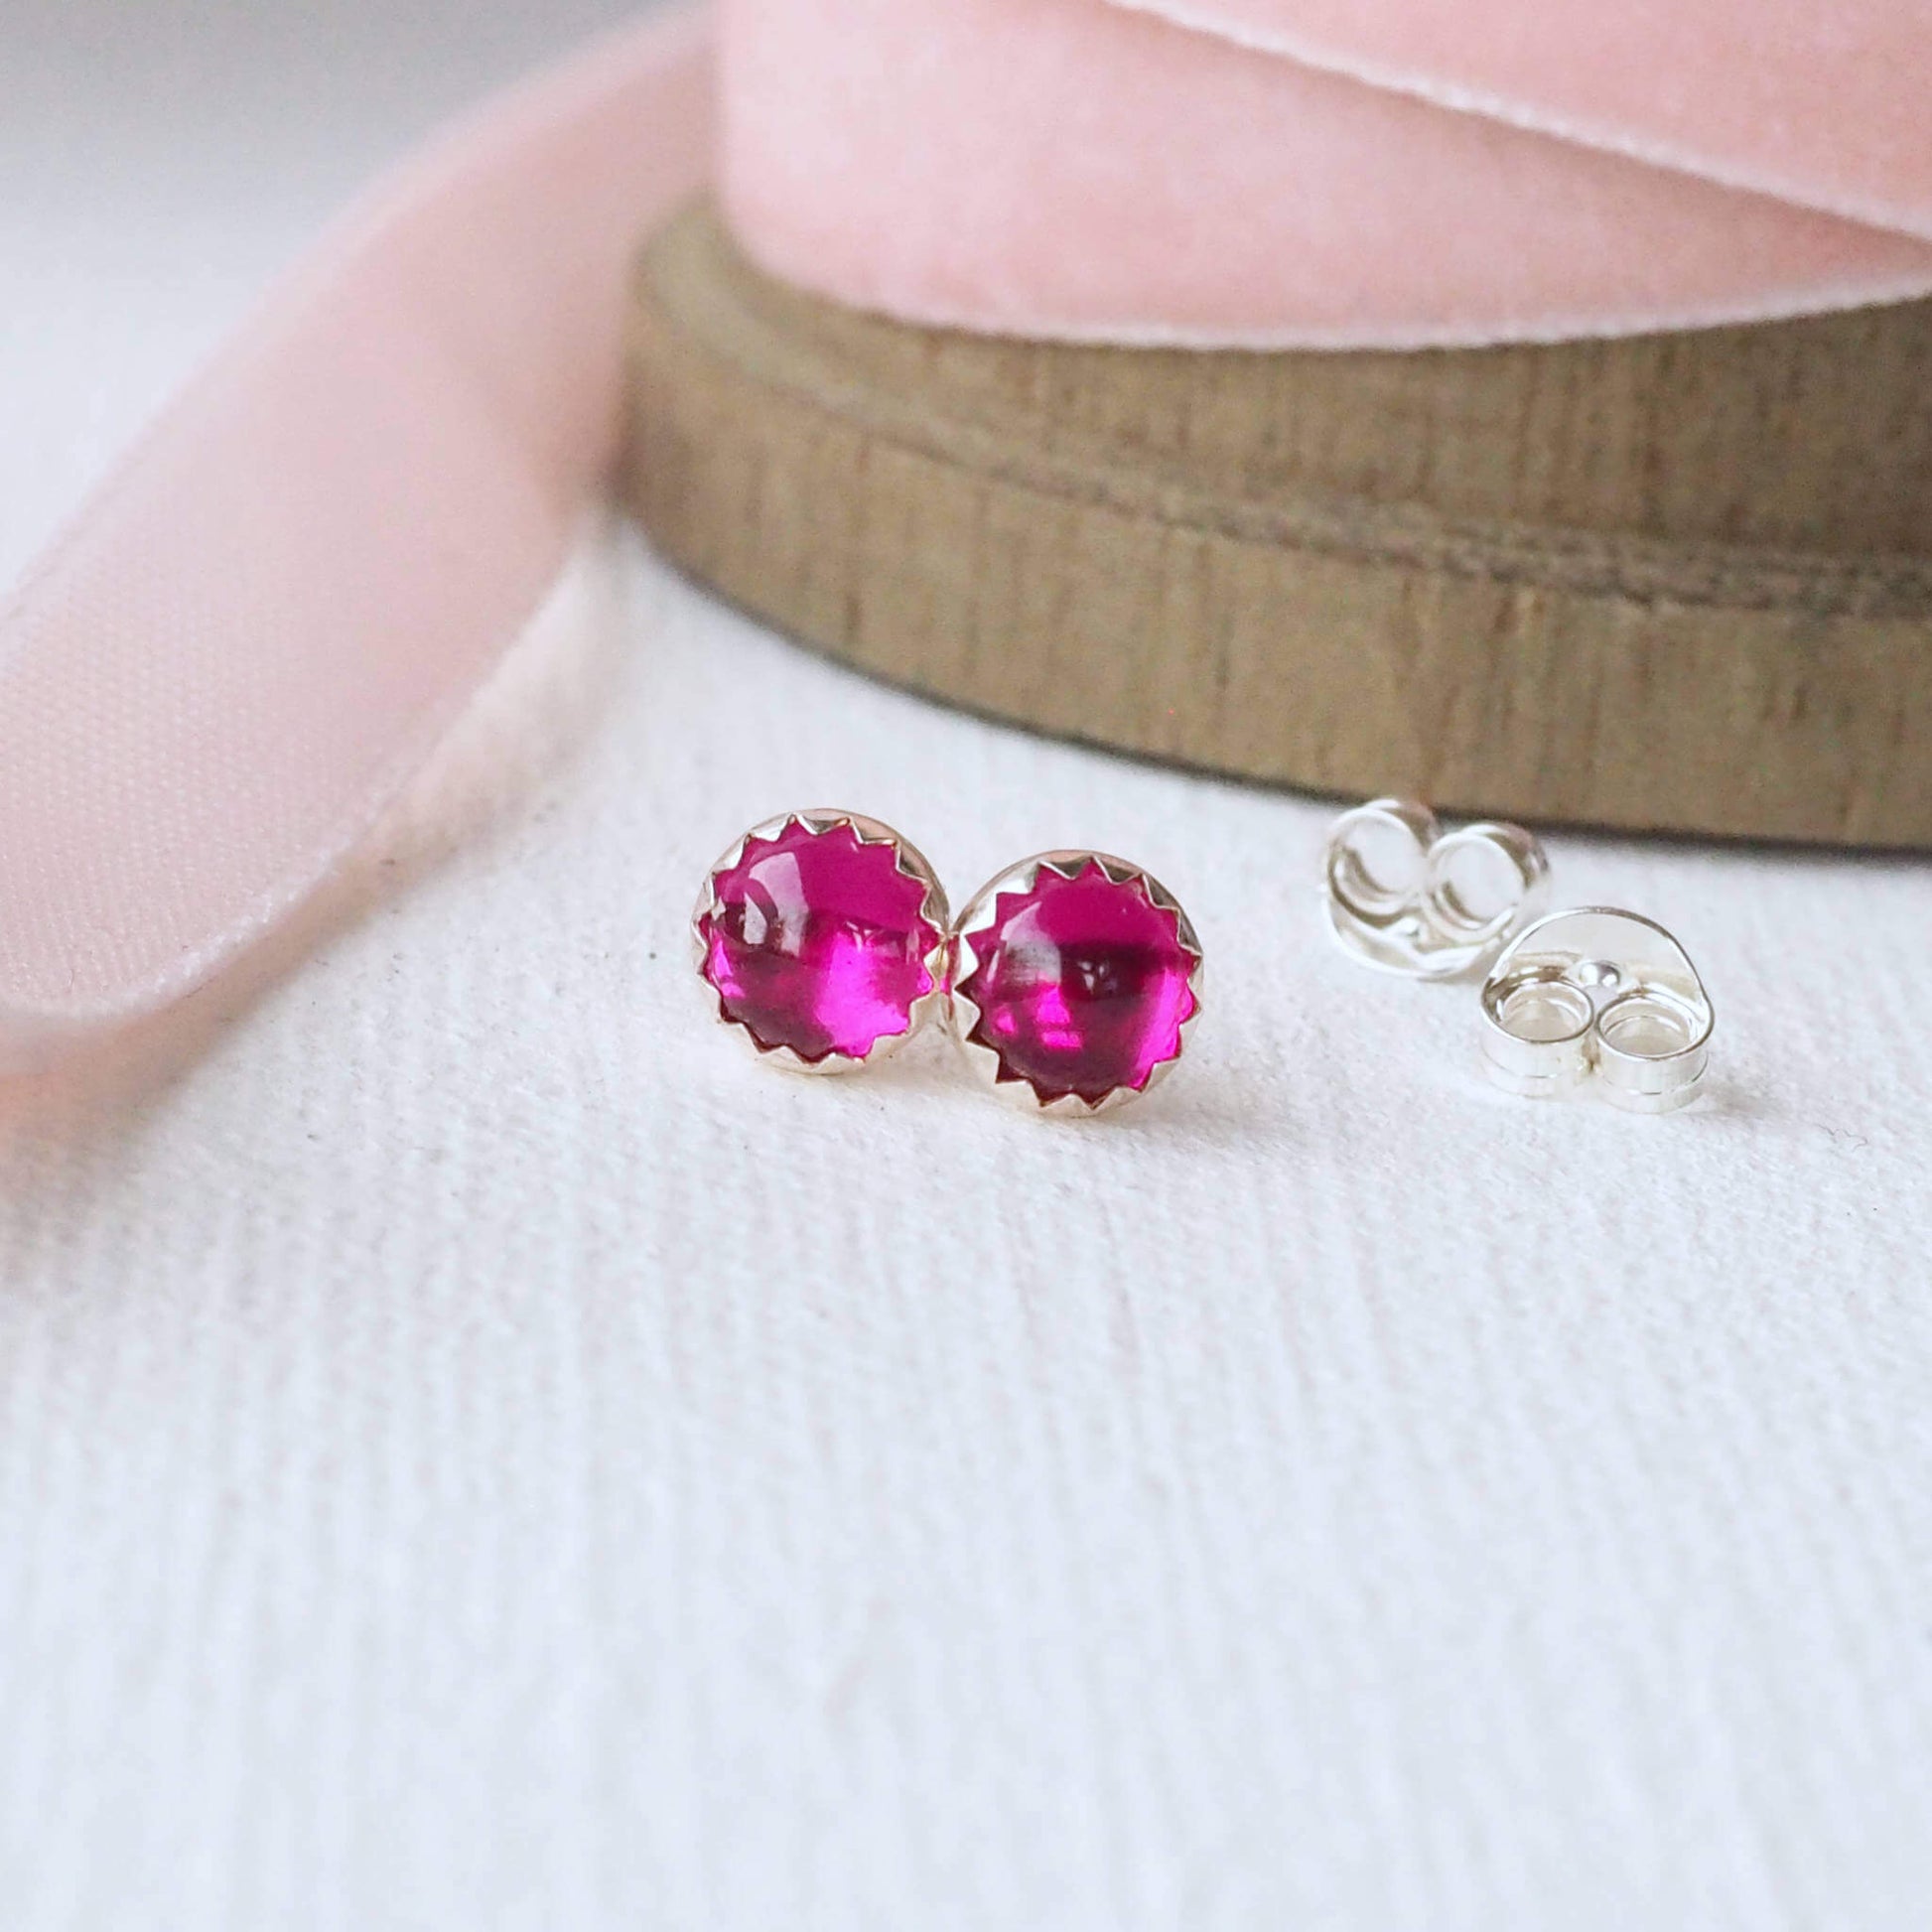 Lab Ruby Pink gemstone studs made from a pair of round 5mm cabochon cut pink lab grown rubies. they are set by hand into a simple sterling silver mount and are pictured on a white woven background with pale pink ribbon. handcrafted in Scotland by maramjewellery